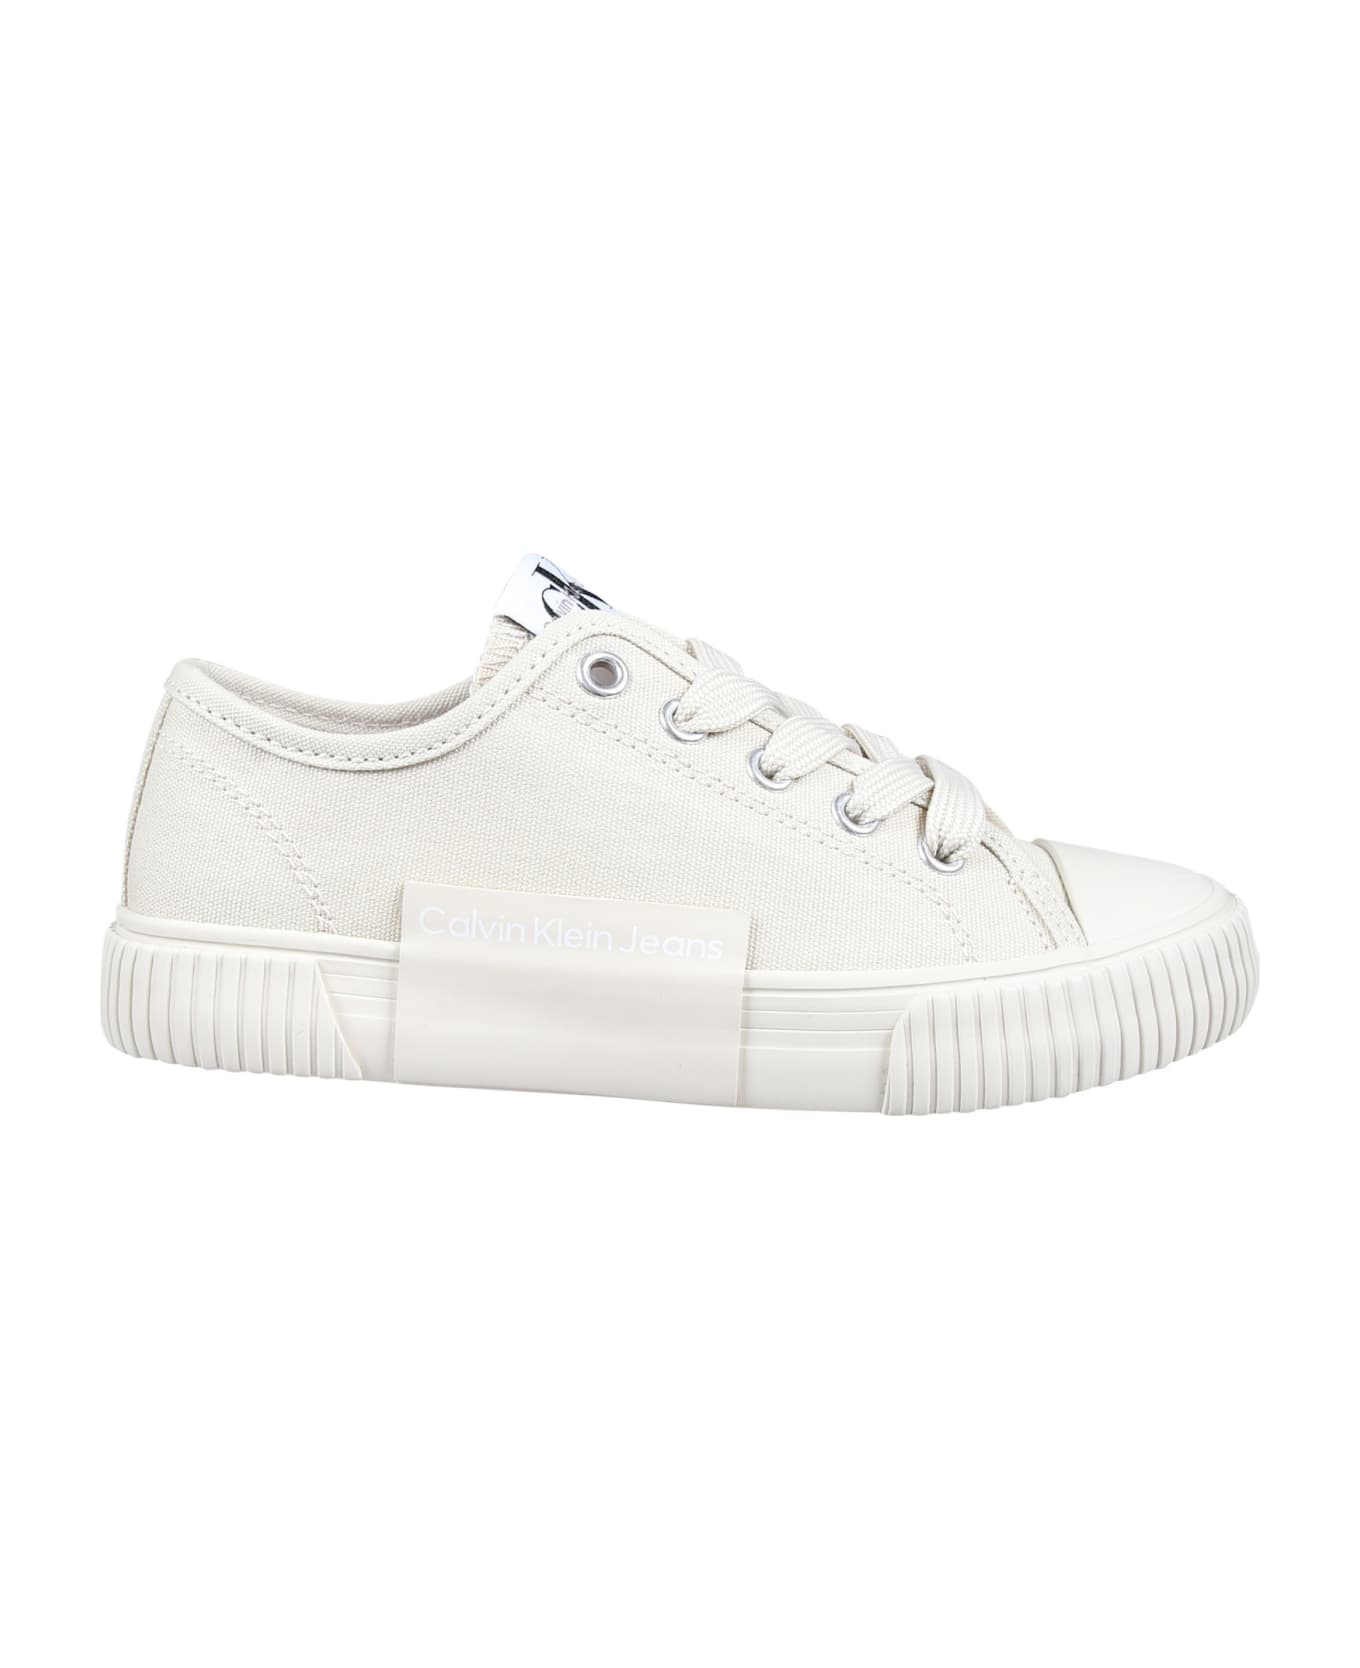 Calvin Klein Ivory Sneakers For Kids With Logo - Ivory